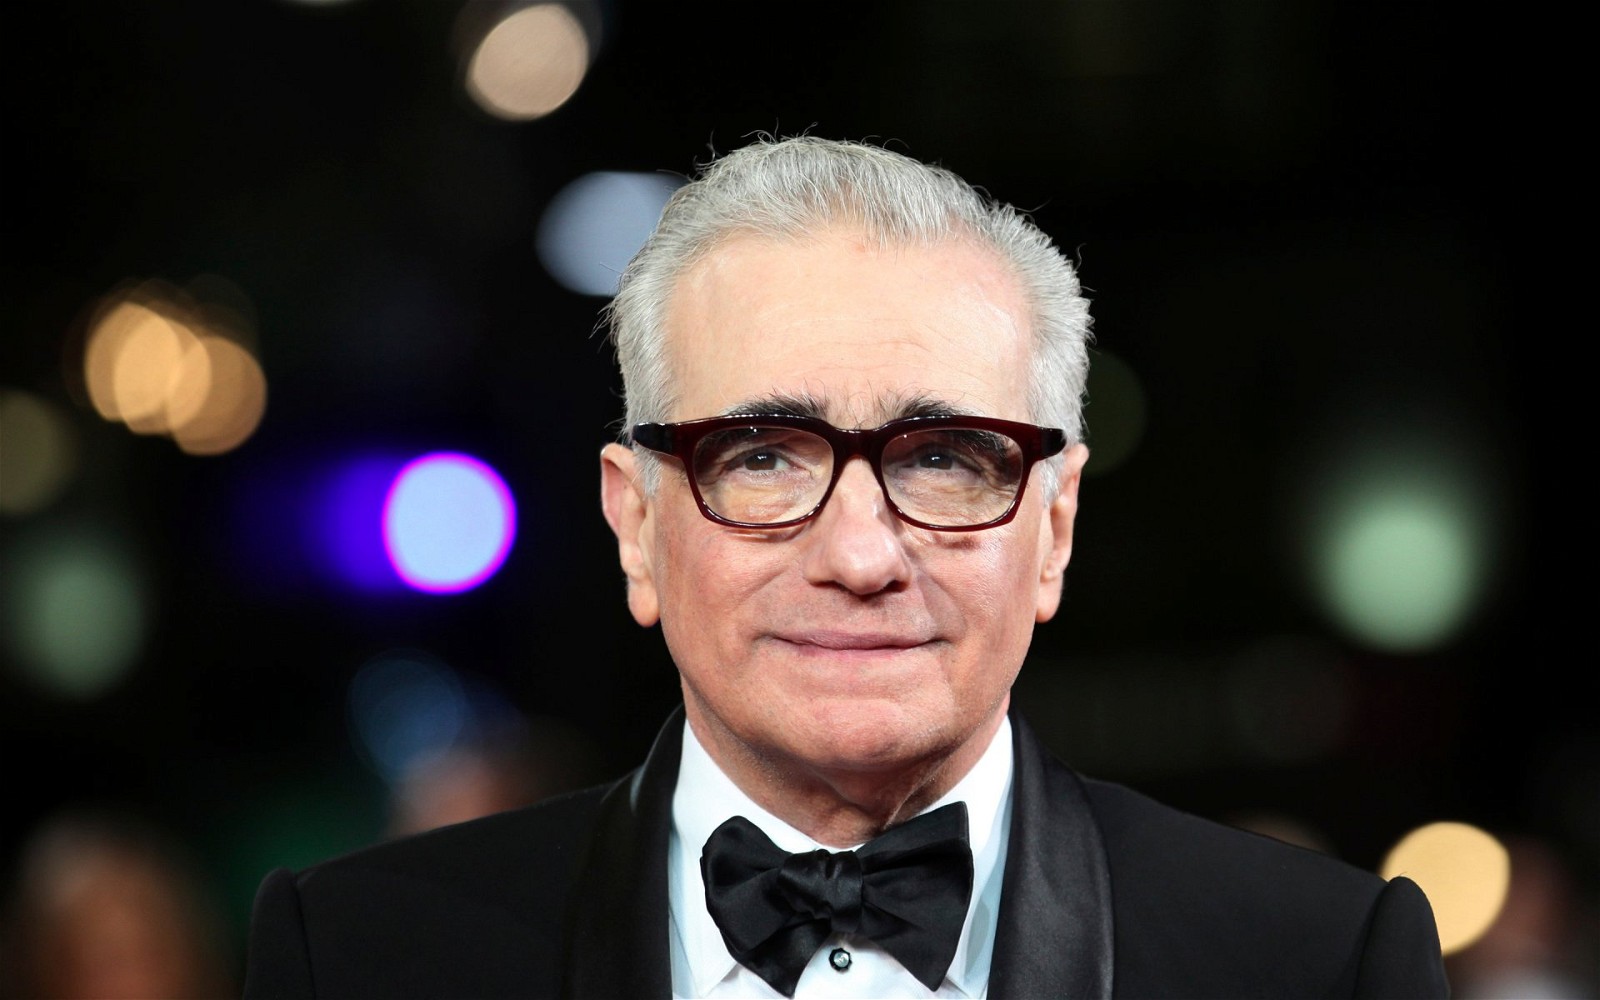 Martin Scorsese is revered as a veteran director.